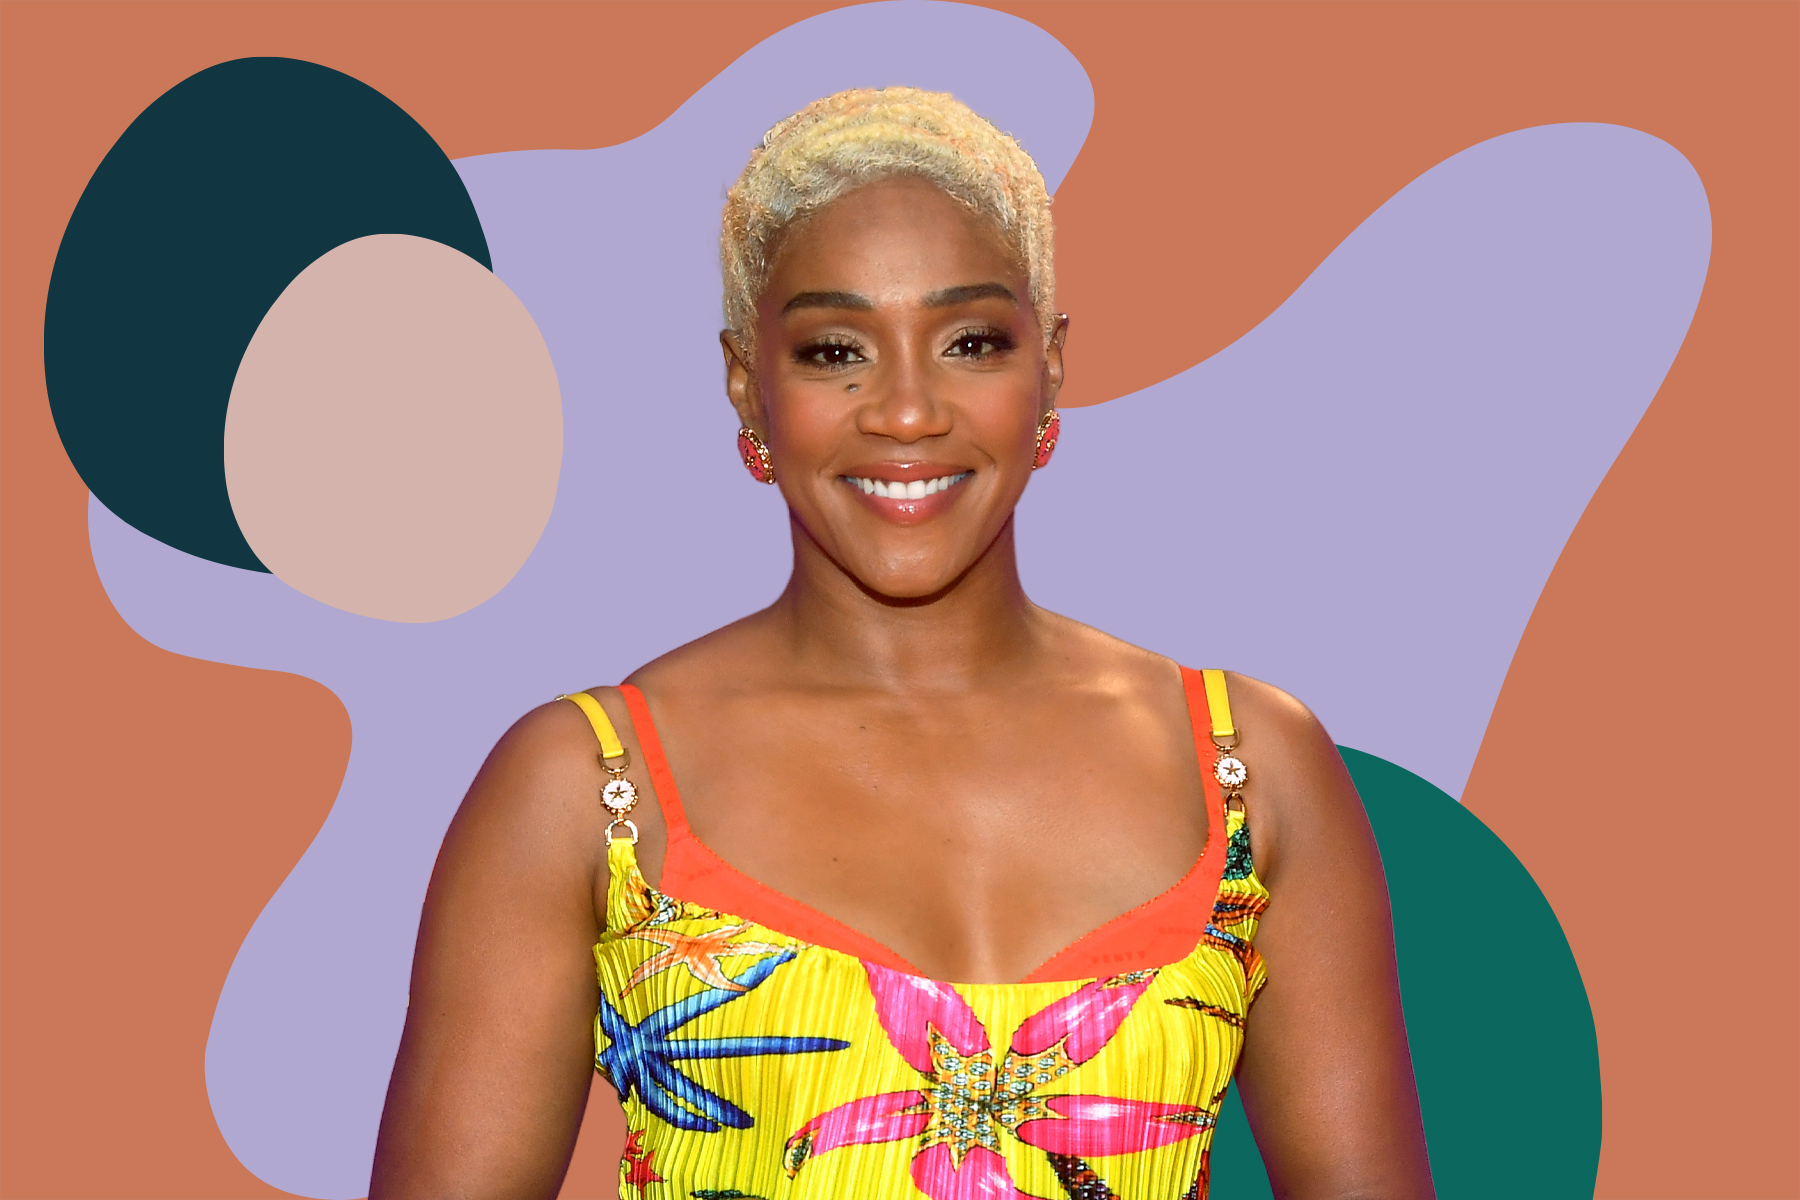 Tiffany Haddish Gets Real About the Struggles of Being a Woman in Comedy | HelloGiggles